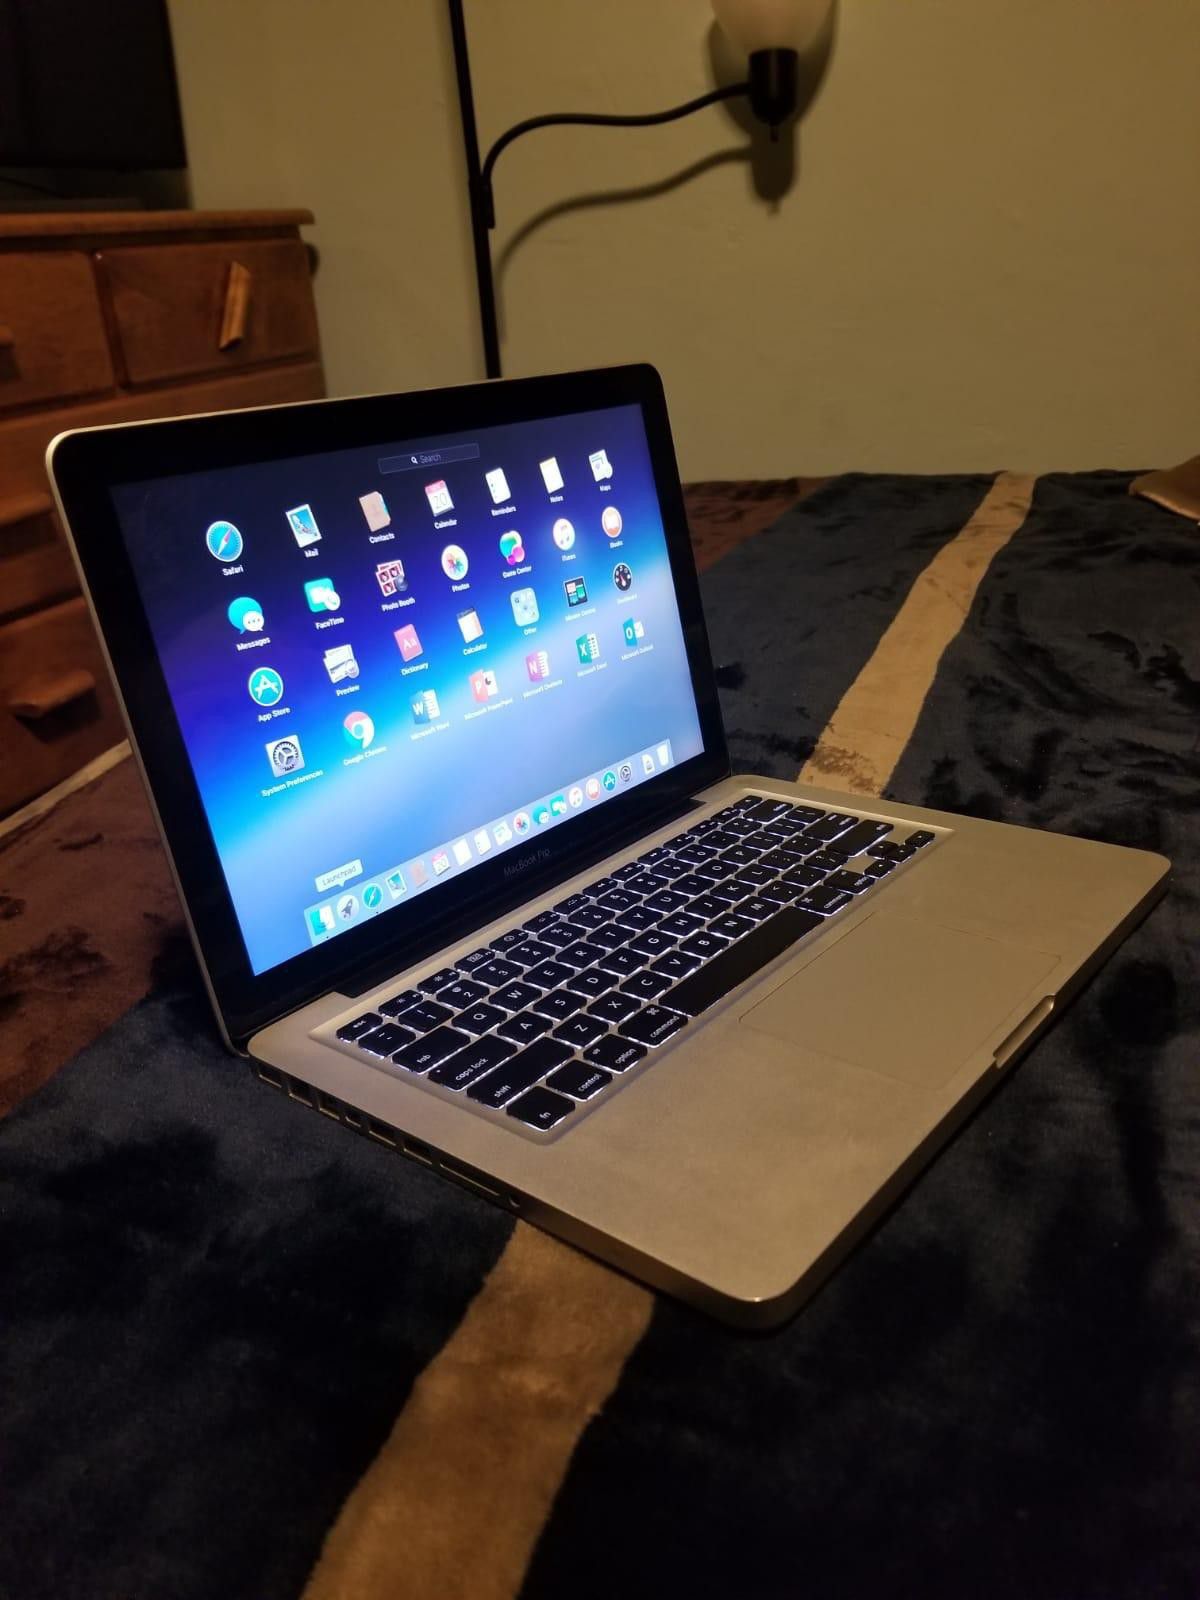 Excellent 15 inch Apple Macbook Pro Laptop computer in good condition with programs